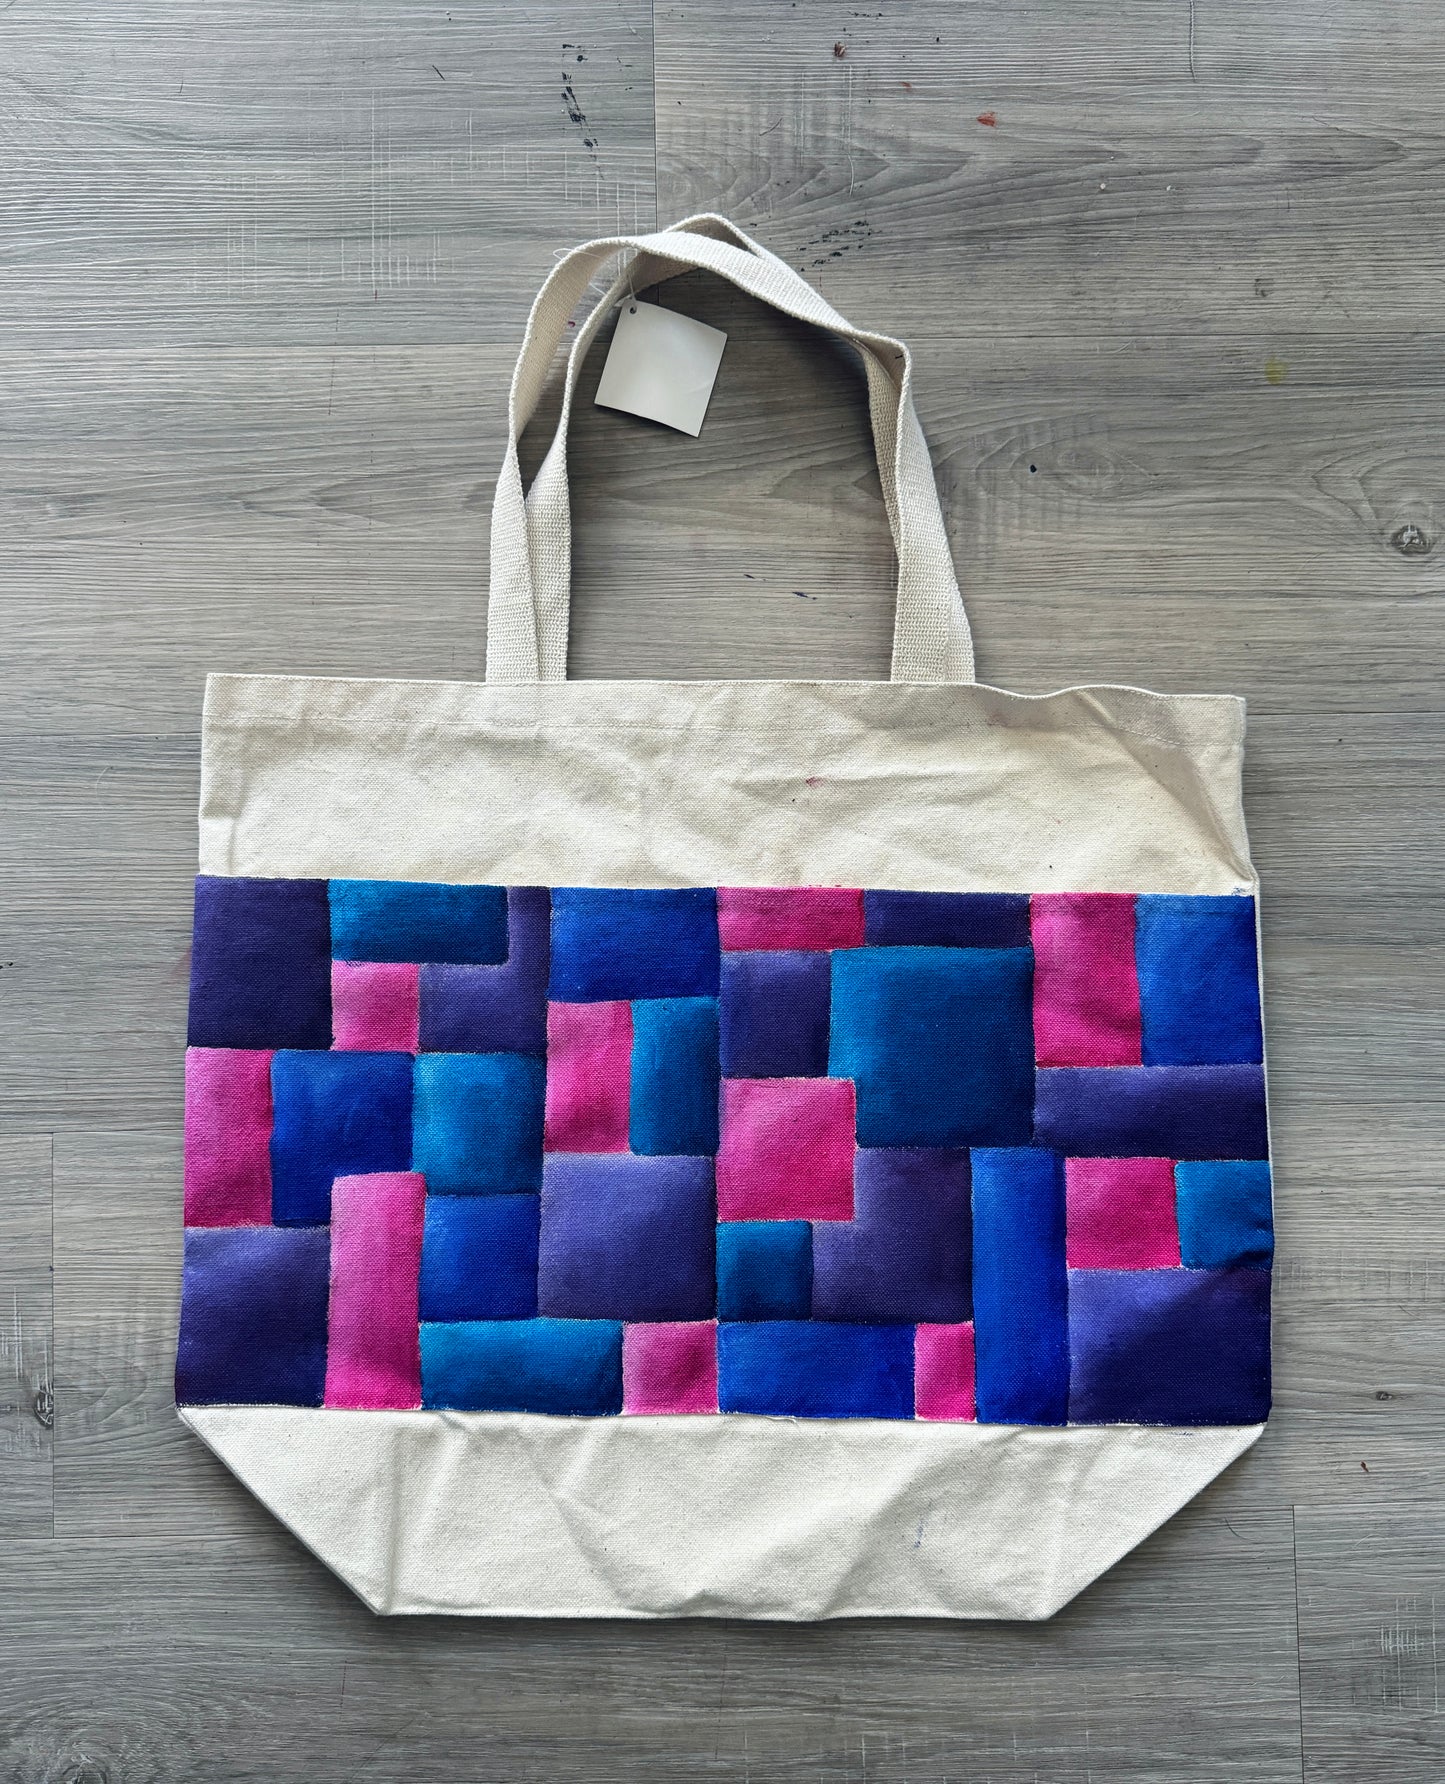 Hand painted tote bags